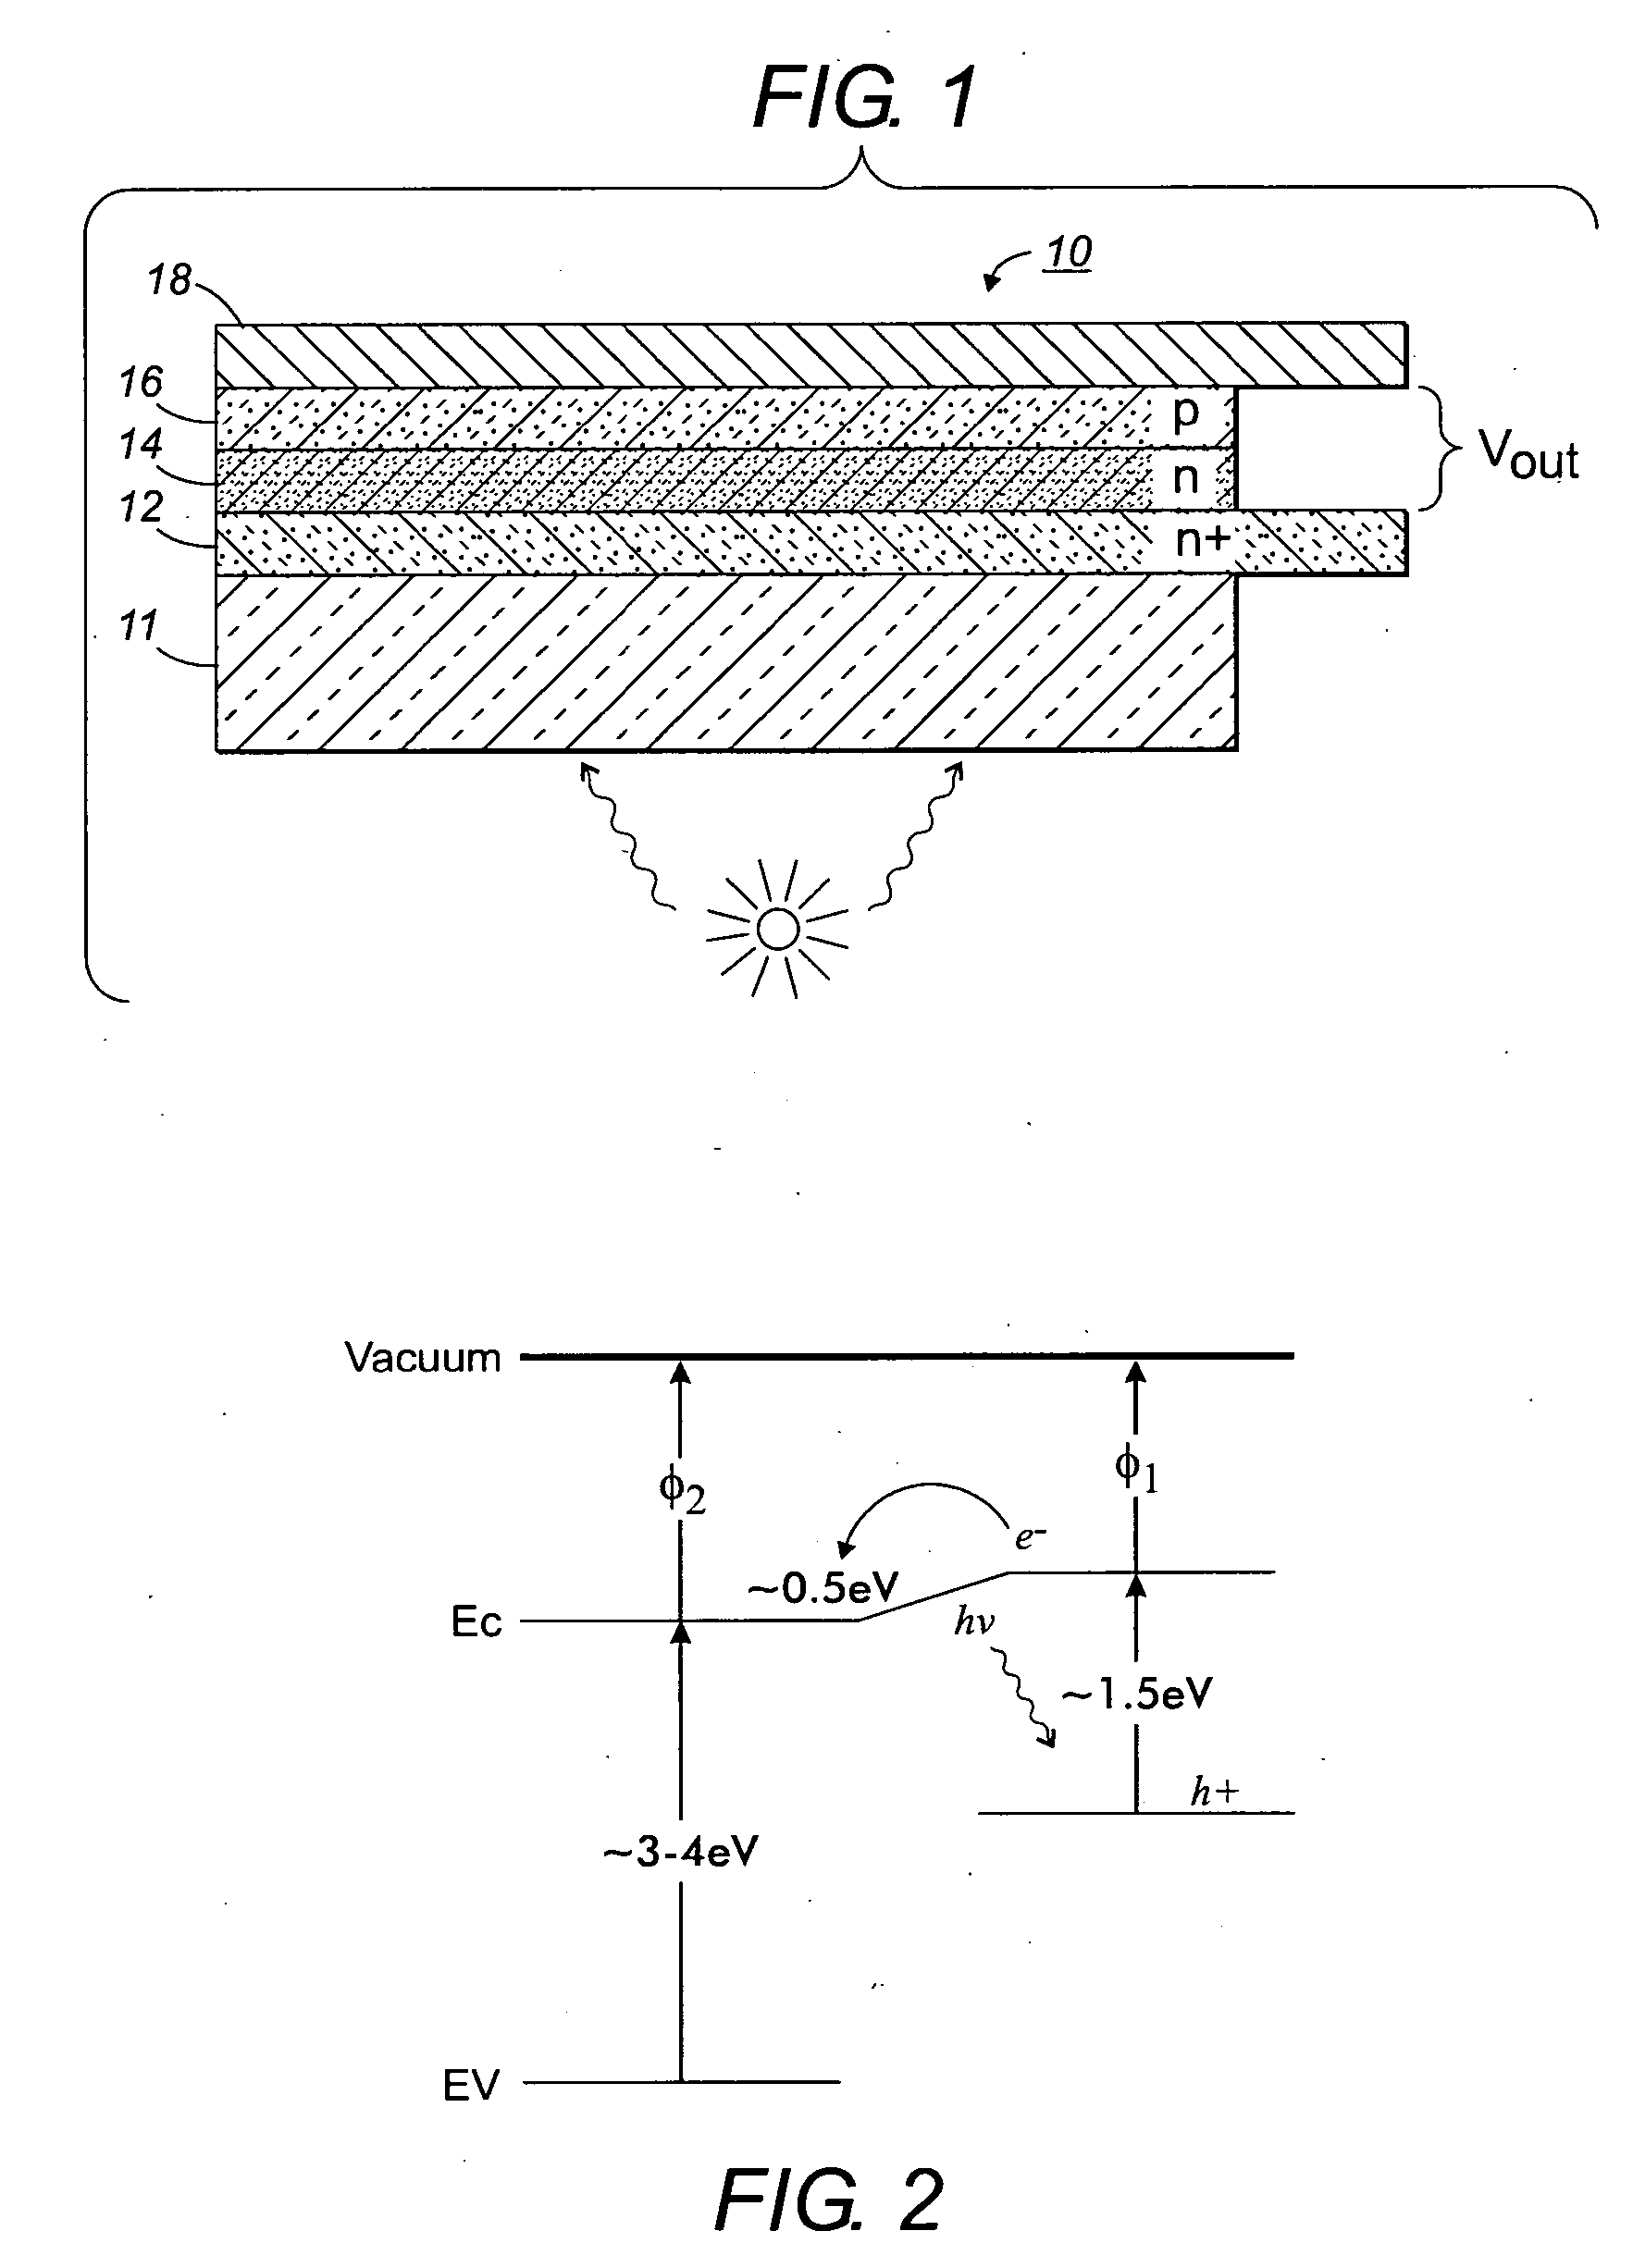 Heterojunction photovoltaic cell